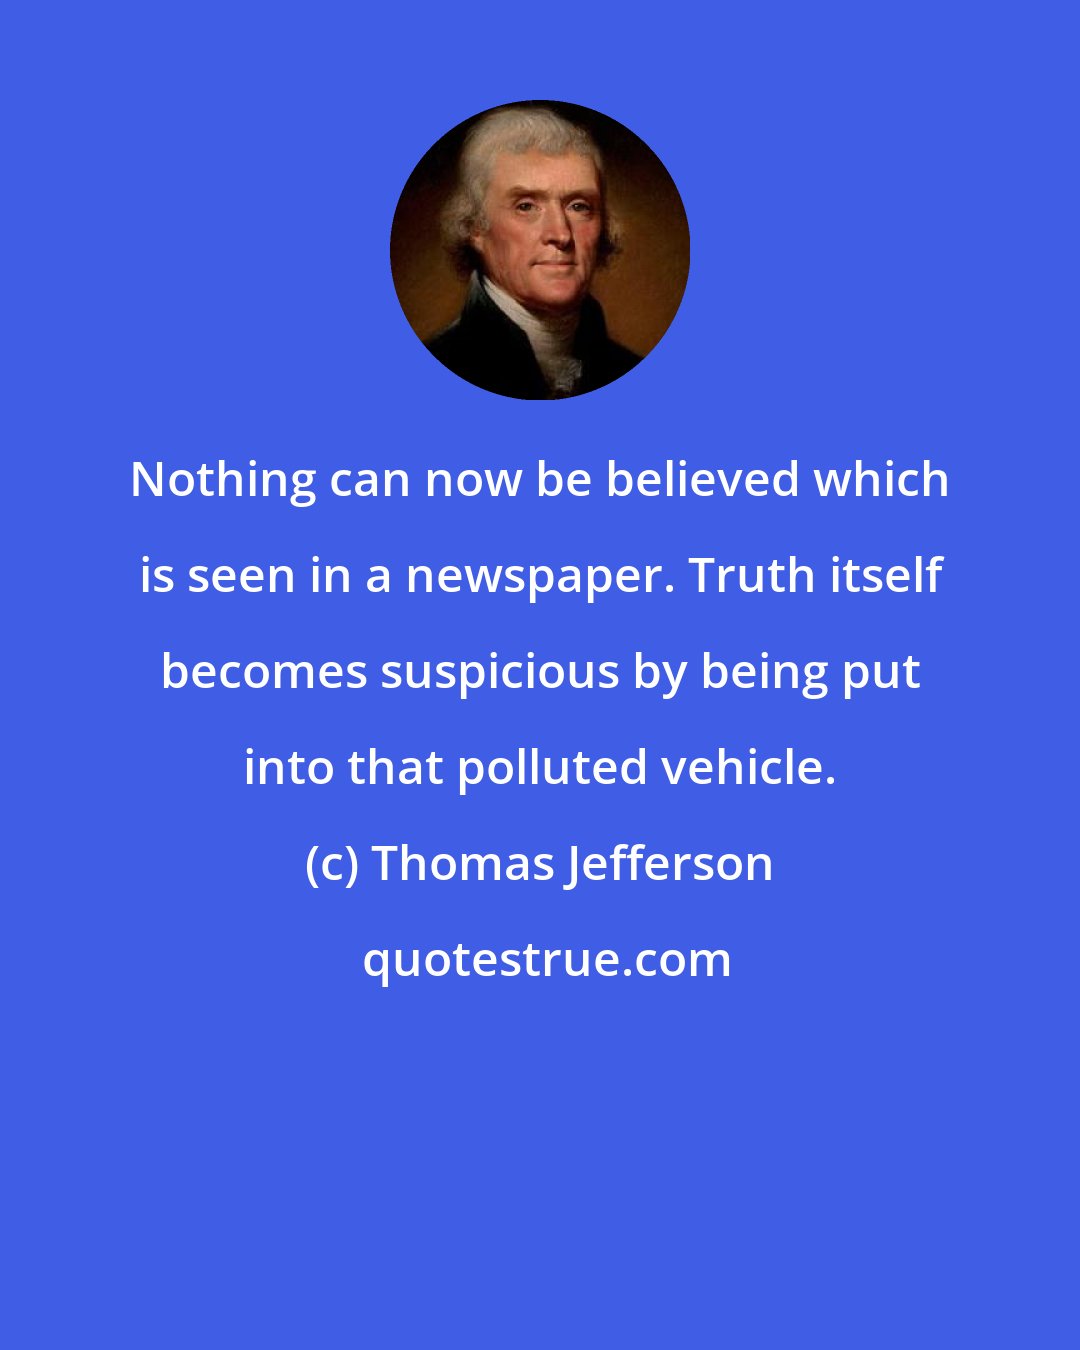 Thomas Jefferson: Nothing can now be believed which is seen in a newspaper. Truth itself becomes suspicious by being put into that polluted vehicle.